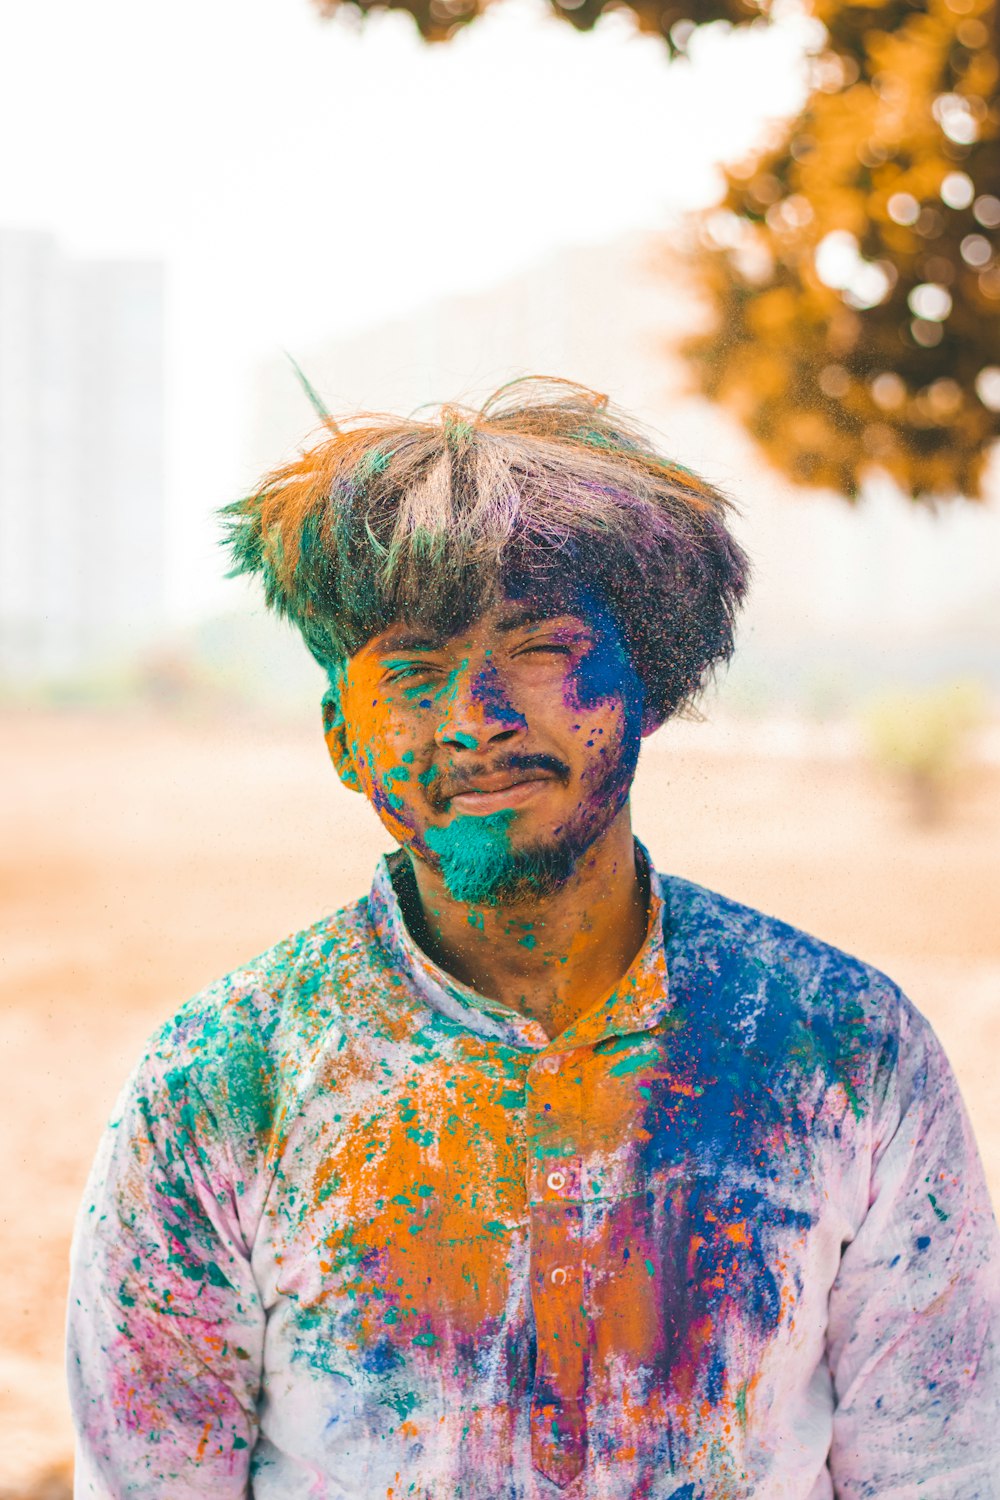 a man covered in colorful paint standing in the dirt